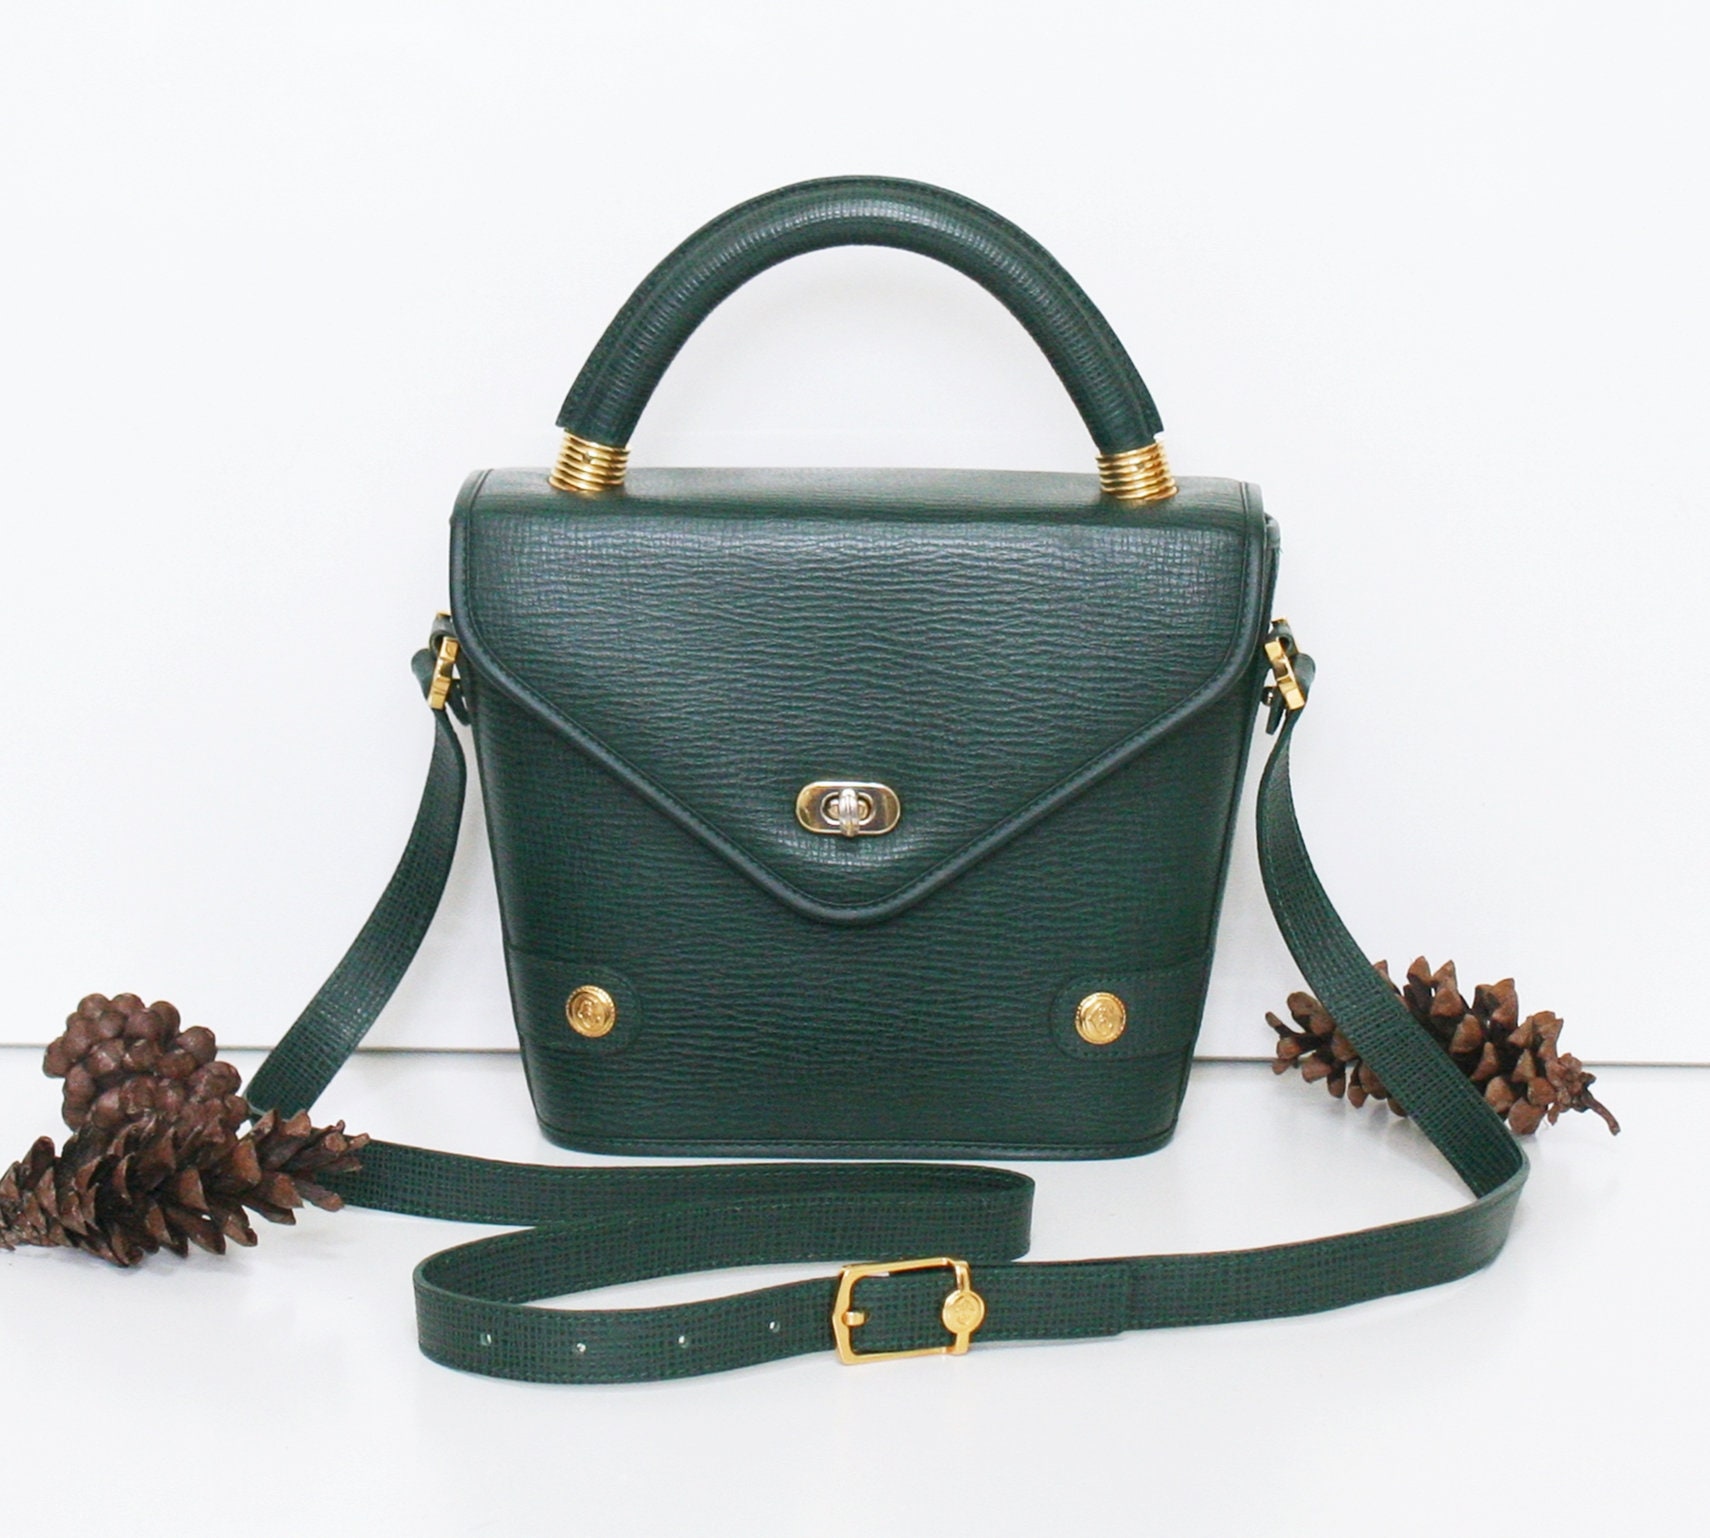 PHILIPPE CHARRIOL / EMERALD GREEN STUDDED CROSSBODY BAG – Where I Was From